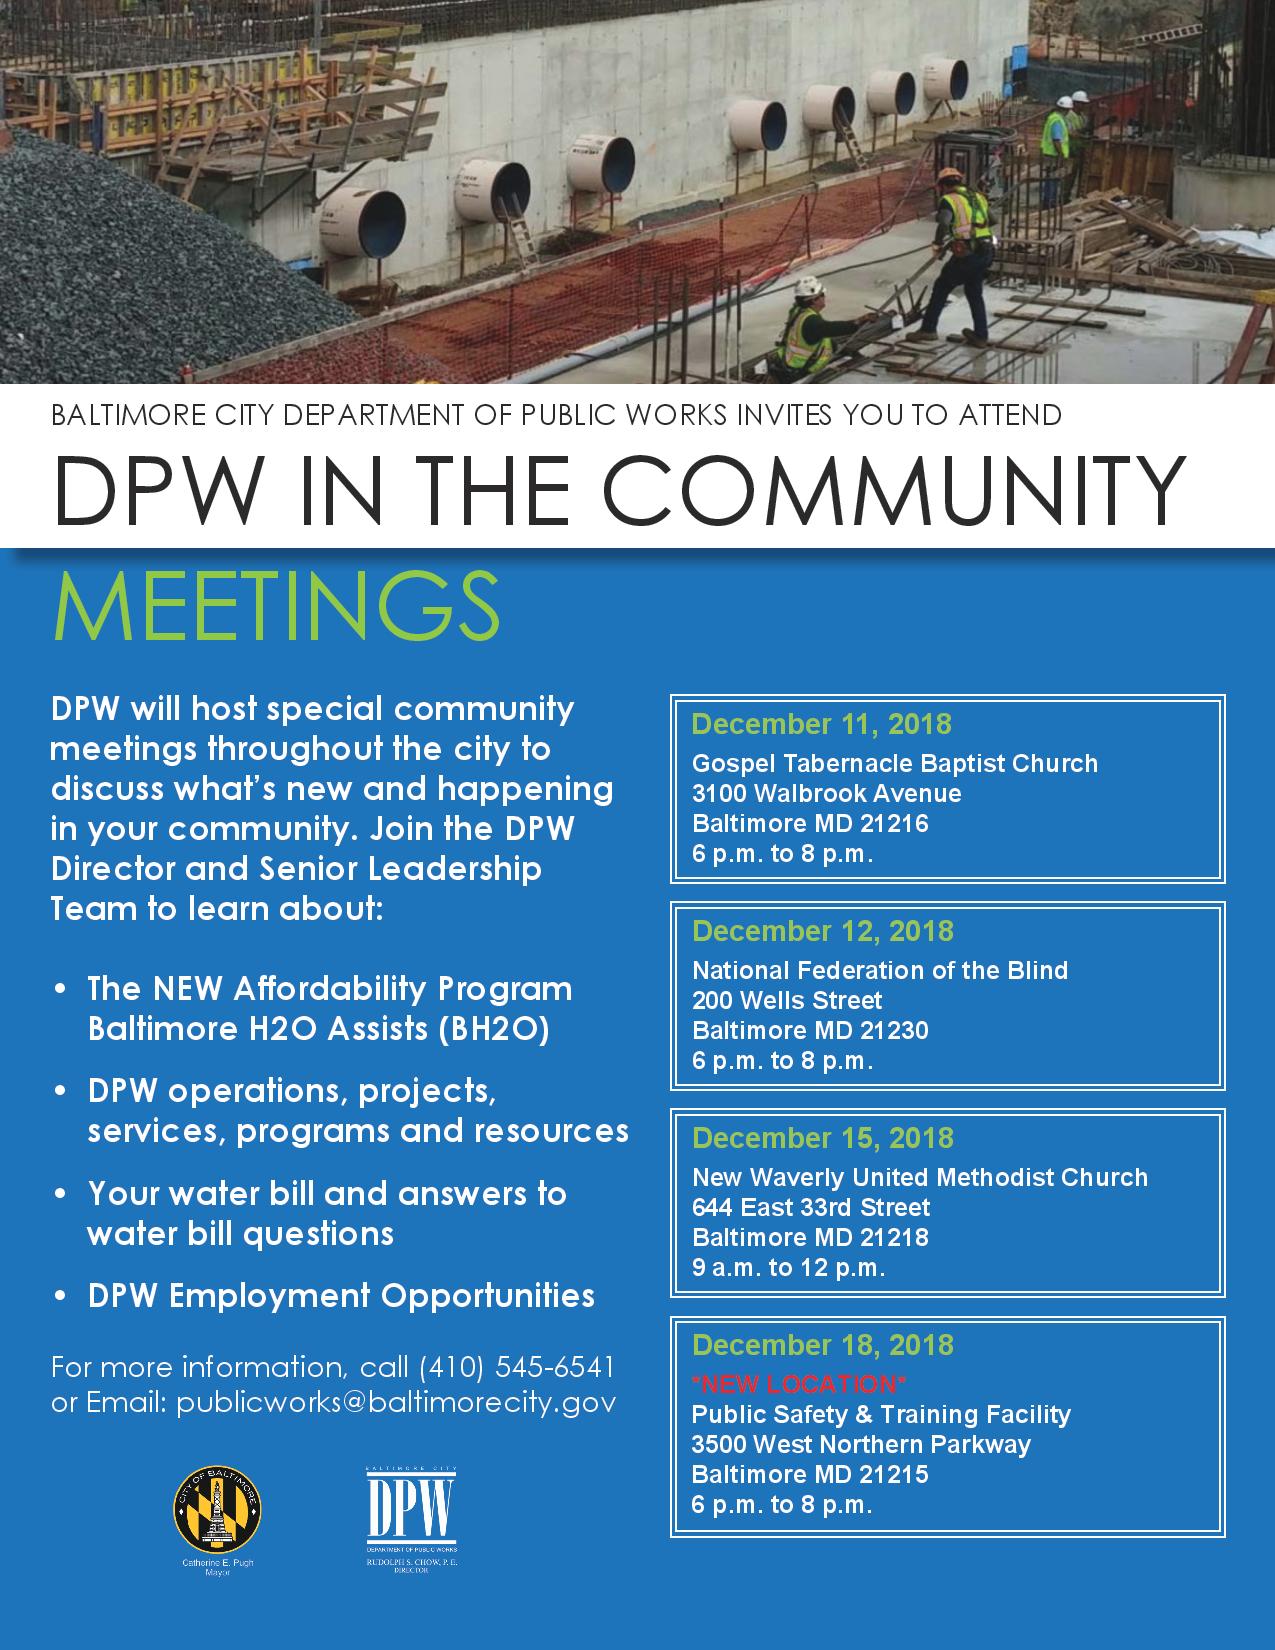 DPW in the Community Meetings 